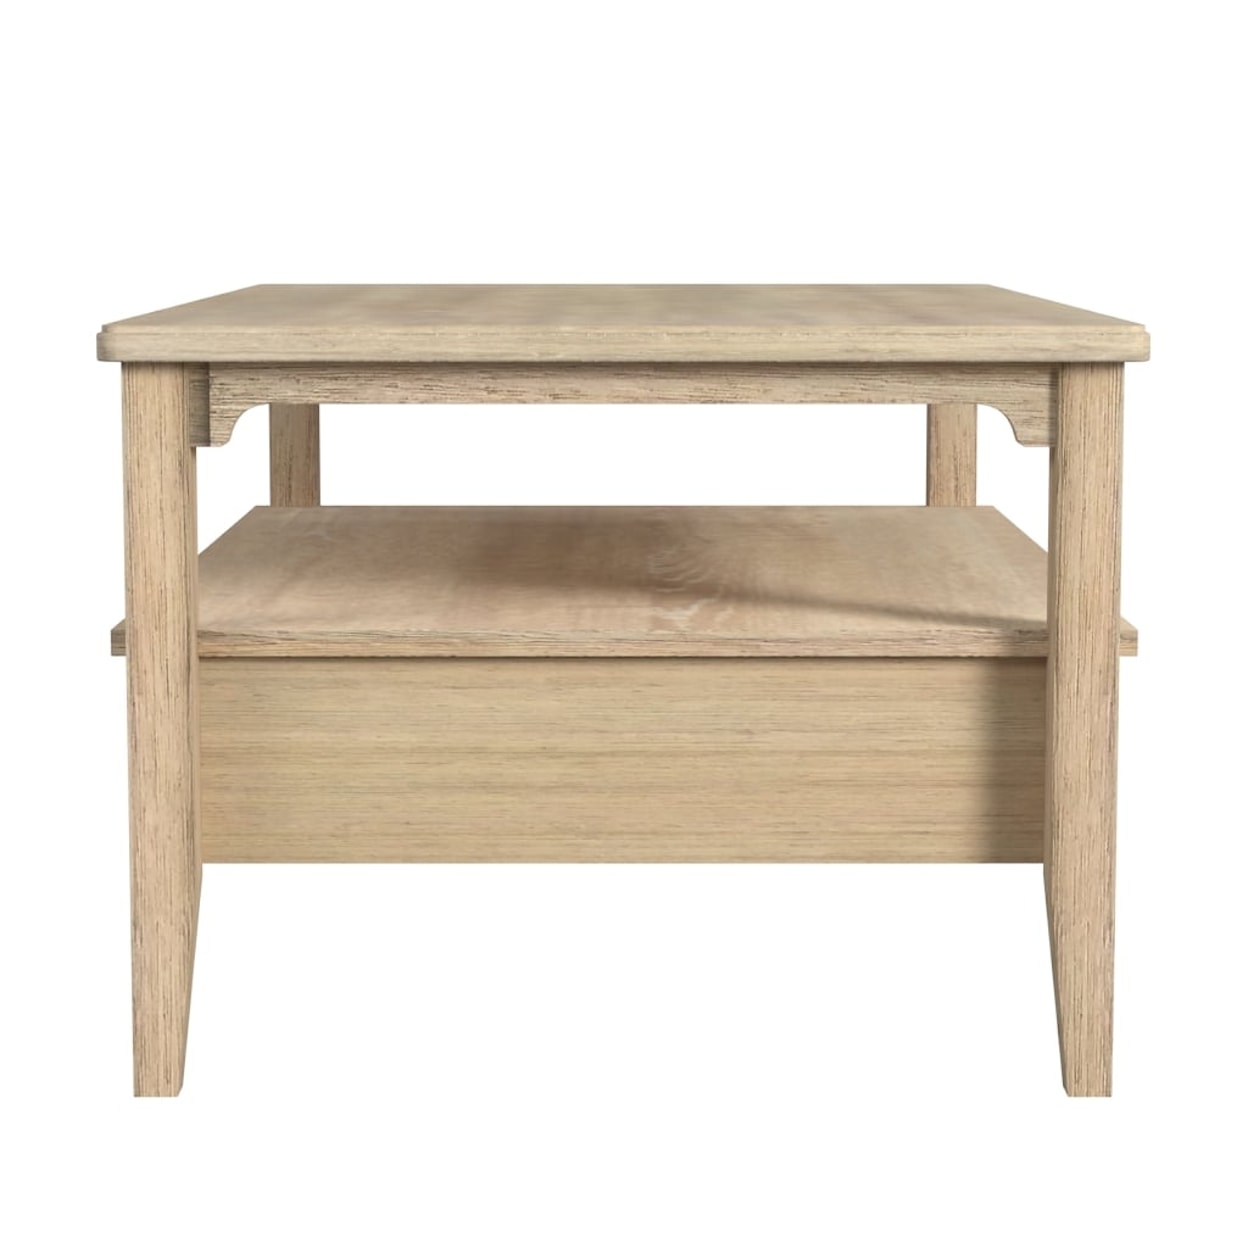 Null Furniture 7023-Chatham  Transitional Rectangular Cocktail Table